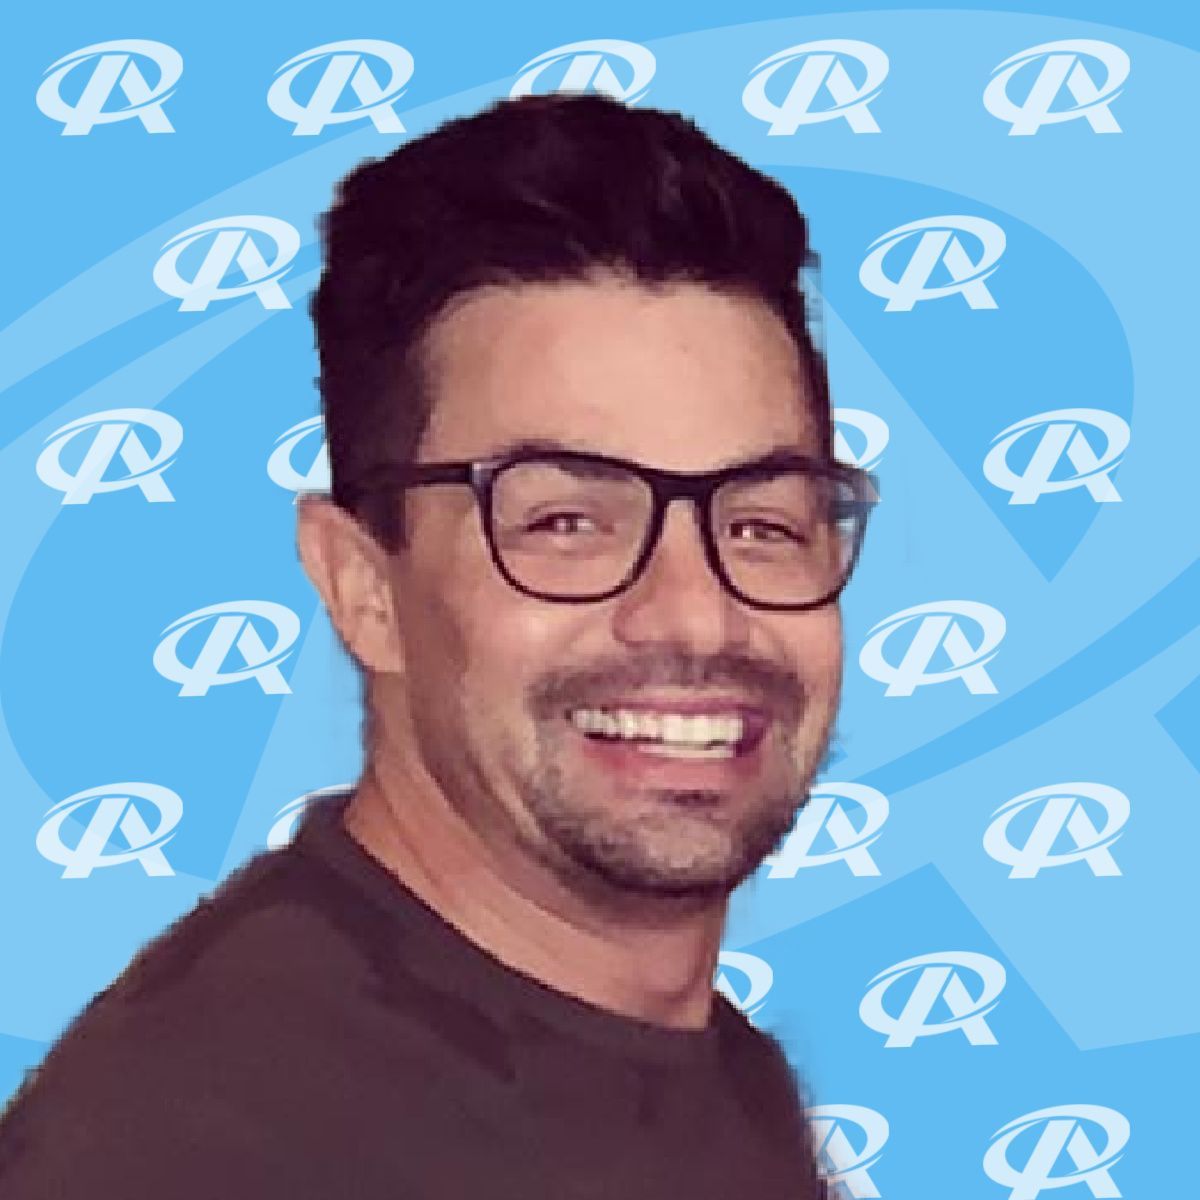 A man wearing glasses is smiling in front of a blue background